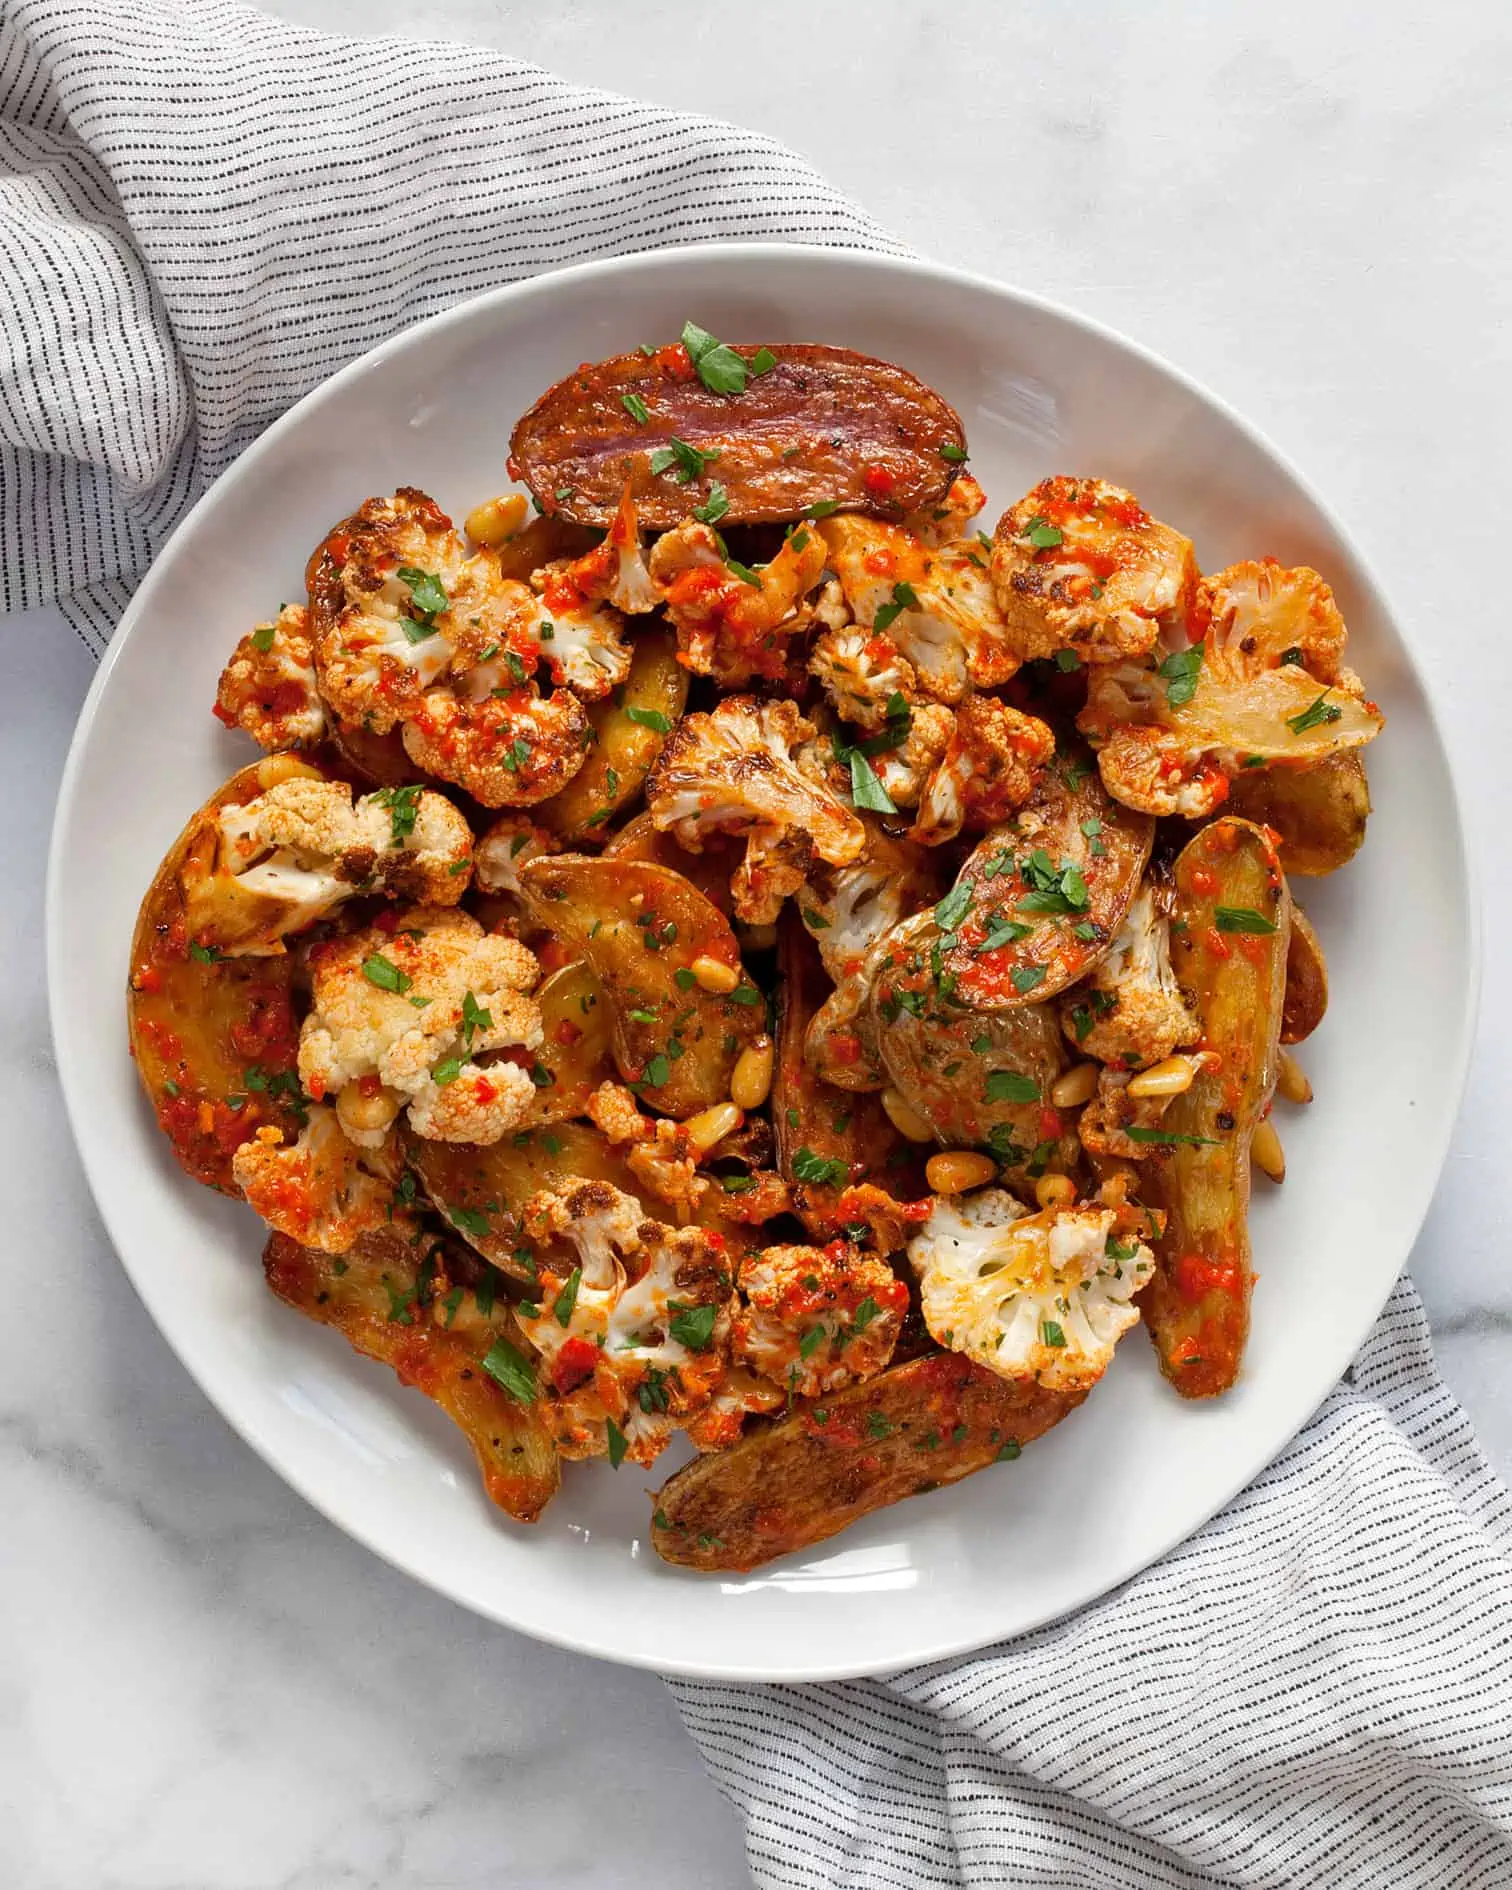 Roasted cauliflower potato salad with red pepper vinaigrette on a plate